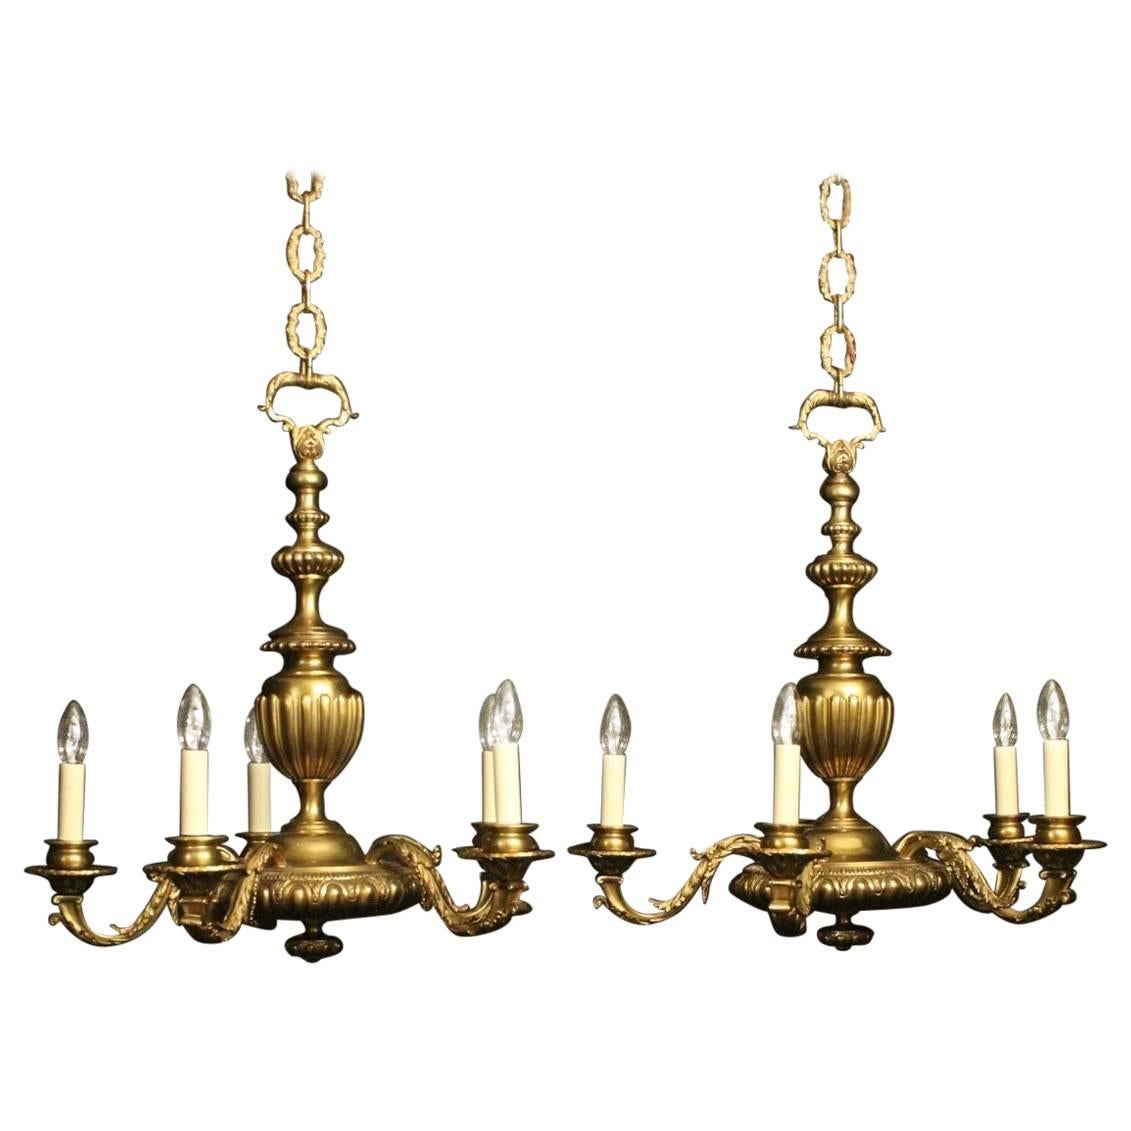 English Pair of Gilded Bronze Faraday & Son Antique Chandeliers